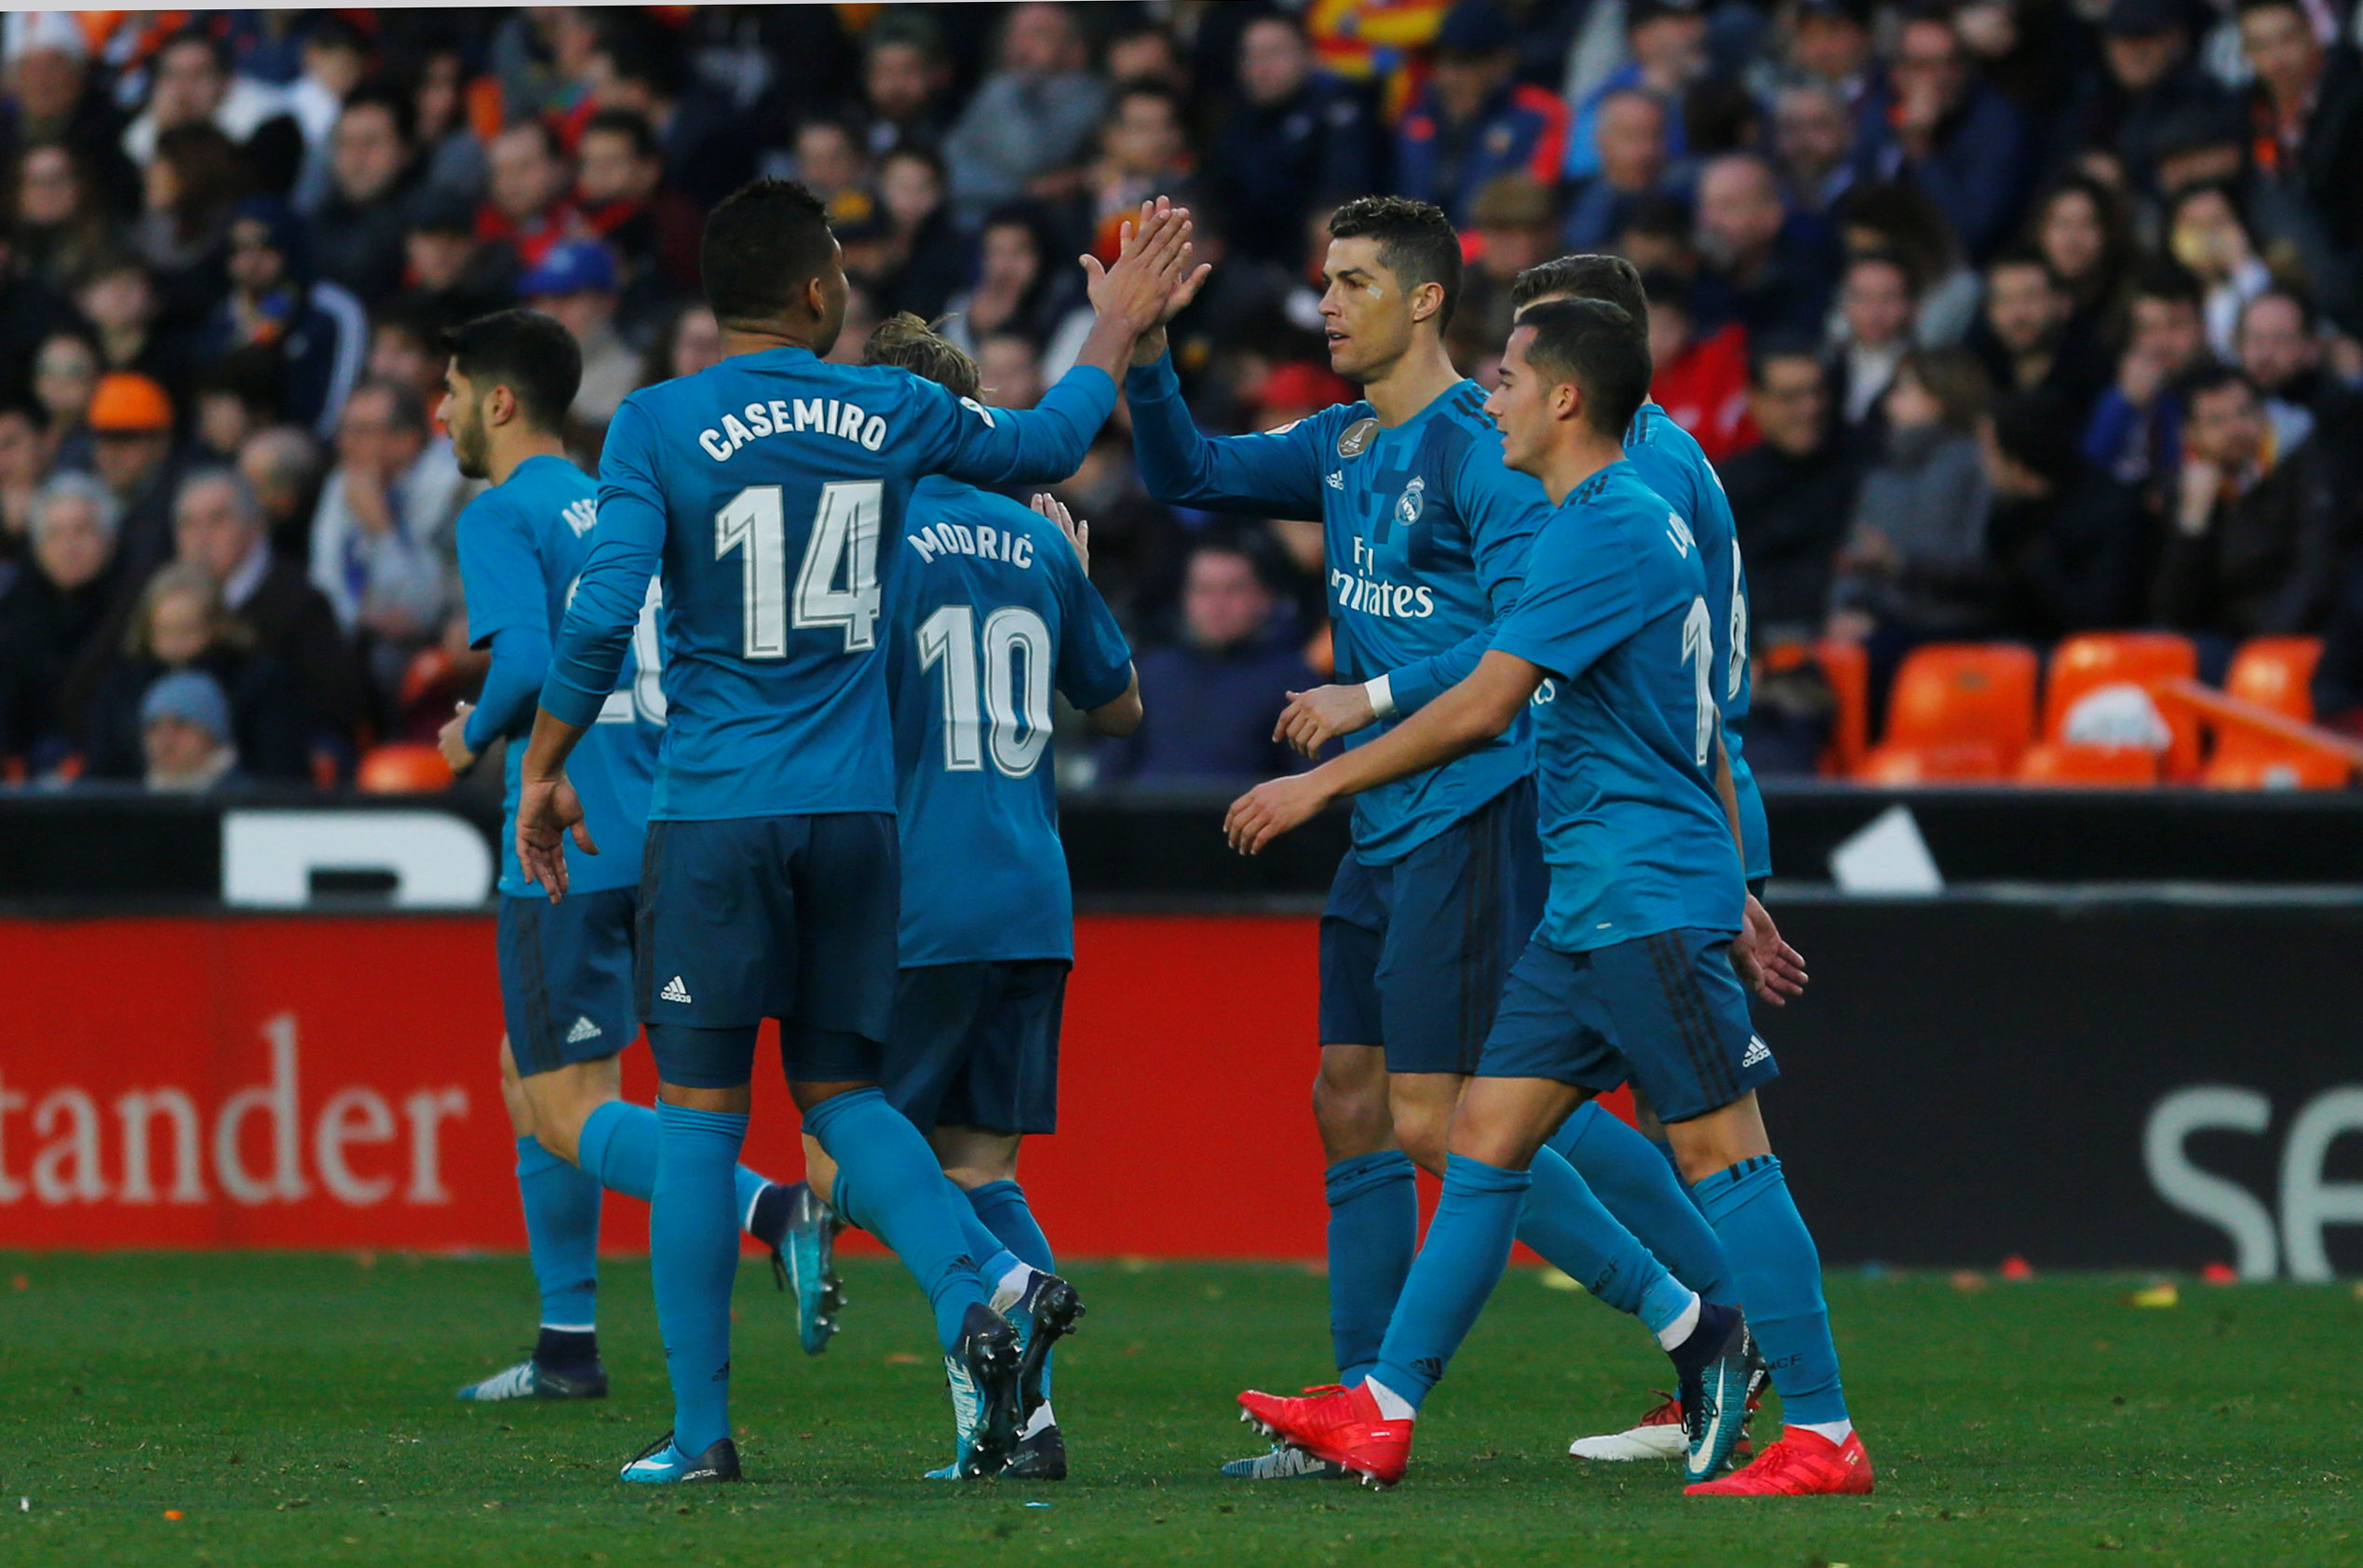 Football: Real Madrid roar back with big win at Valencia